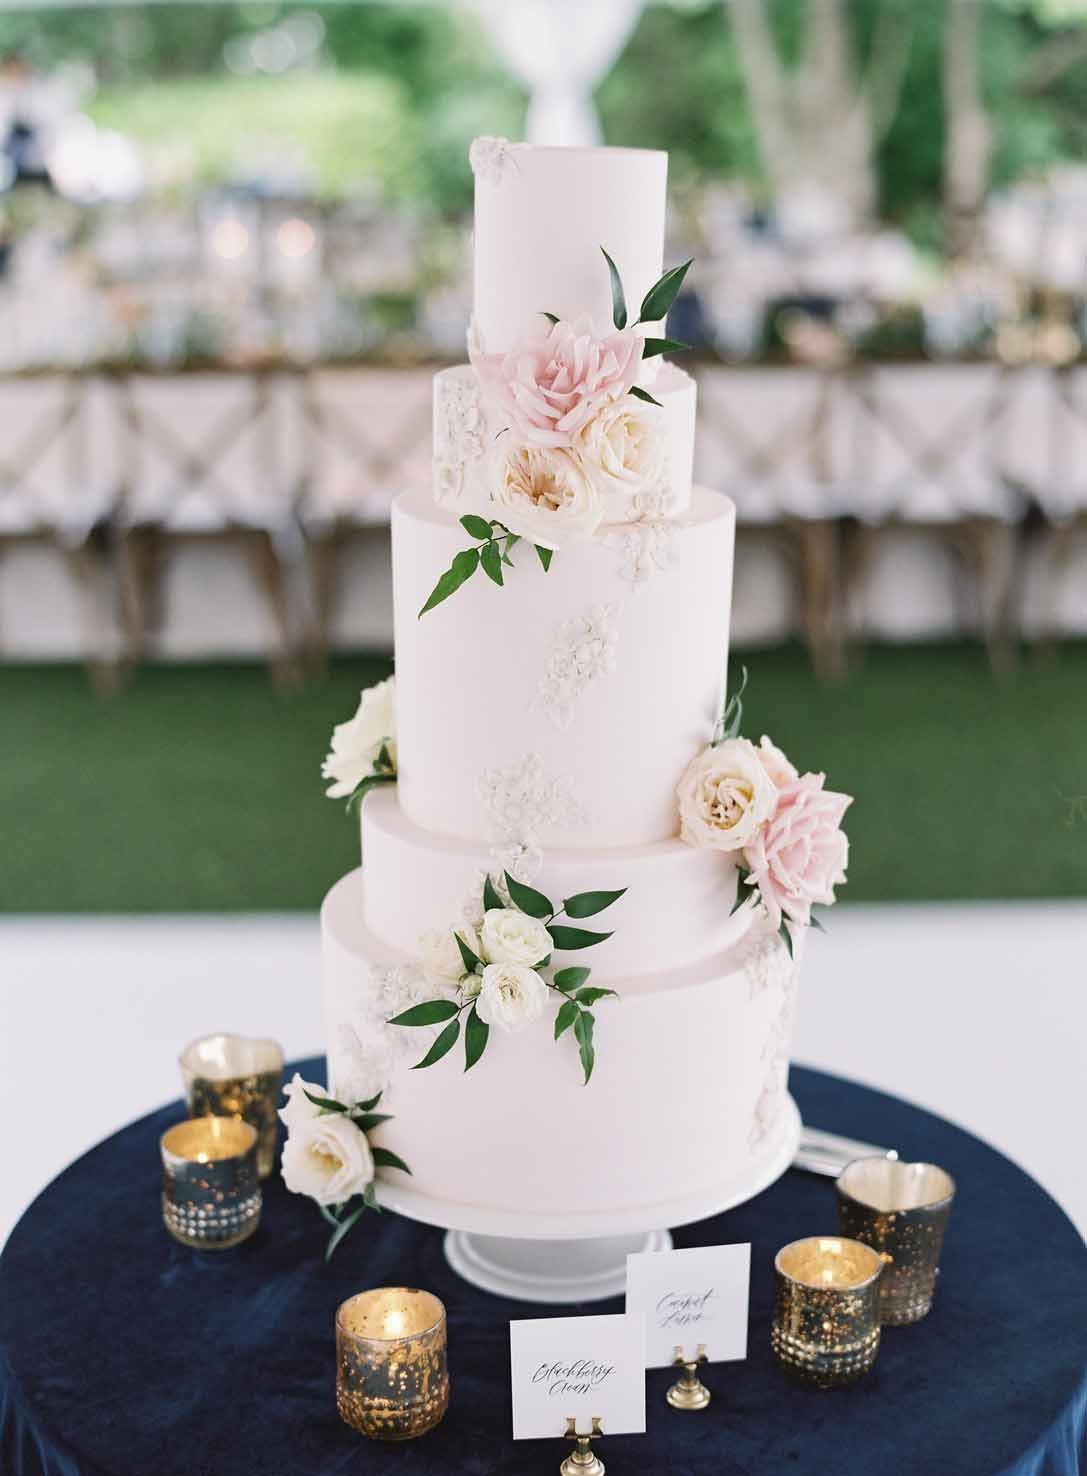 wedding cake with blush and white flowers on table with blue linen and gold votives